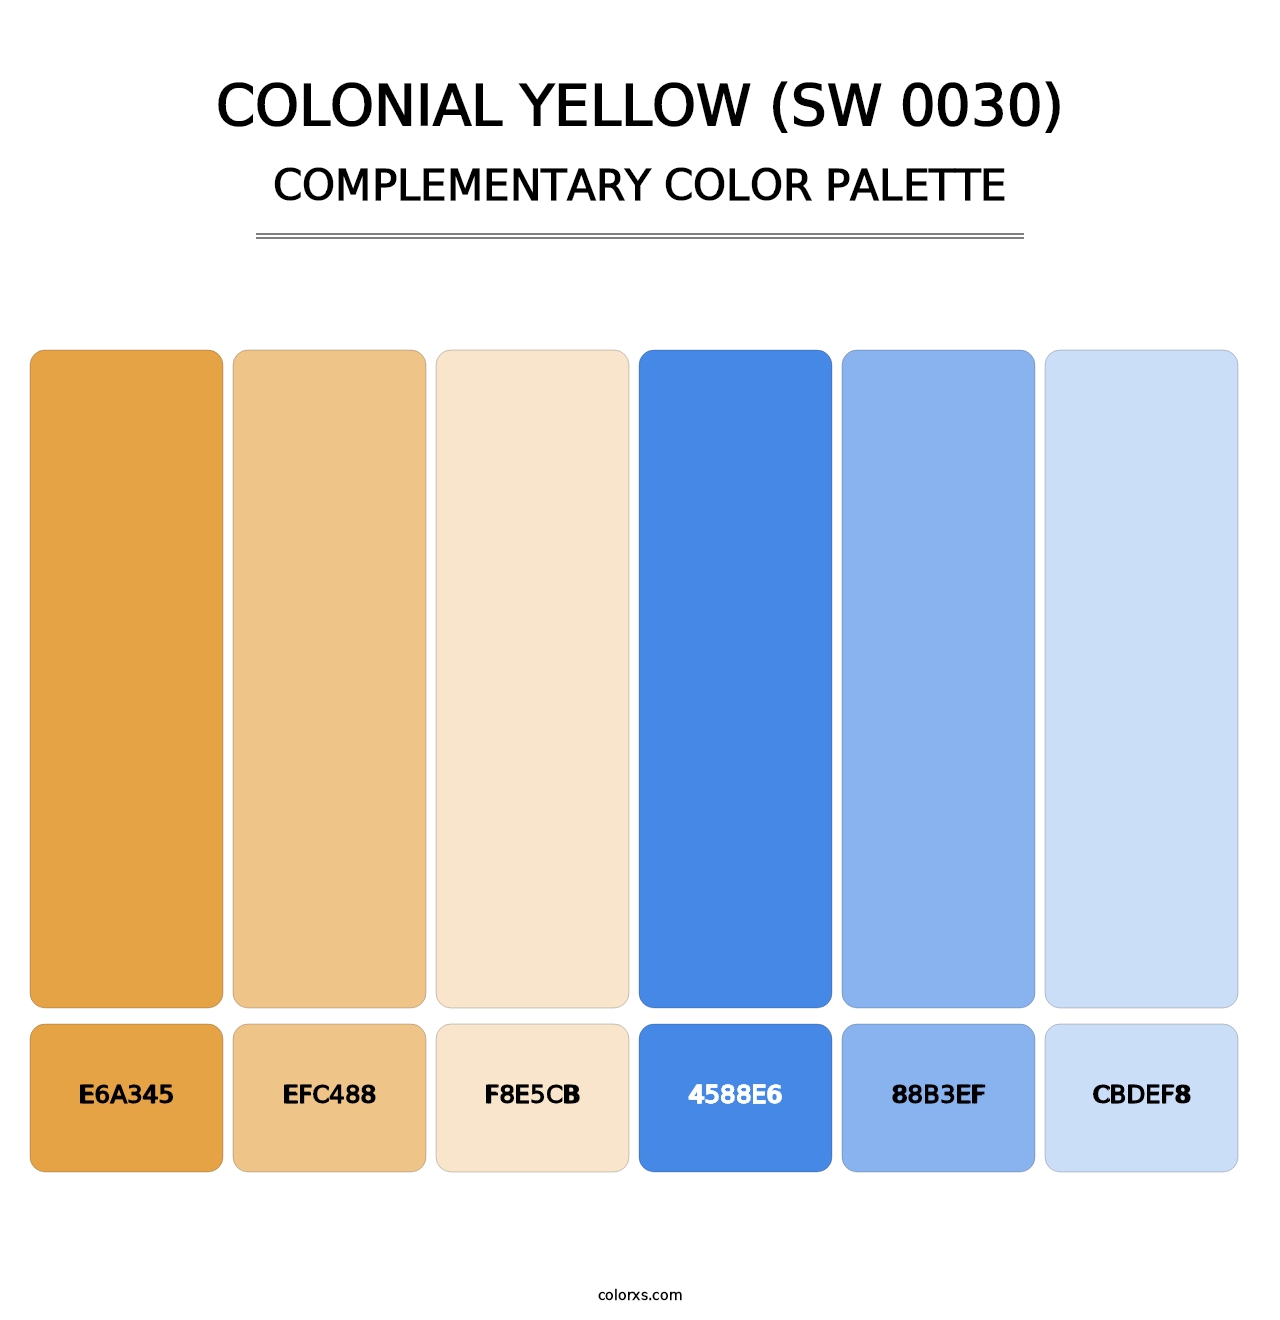 Colonial Yellow (SW 0030) - Complementary Color Palette